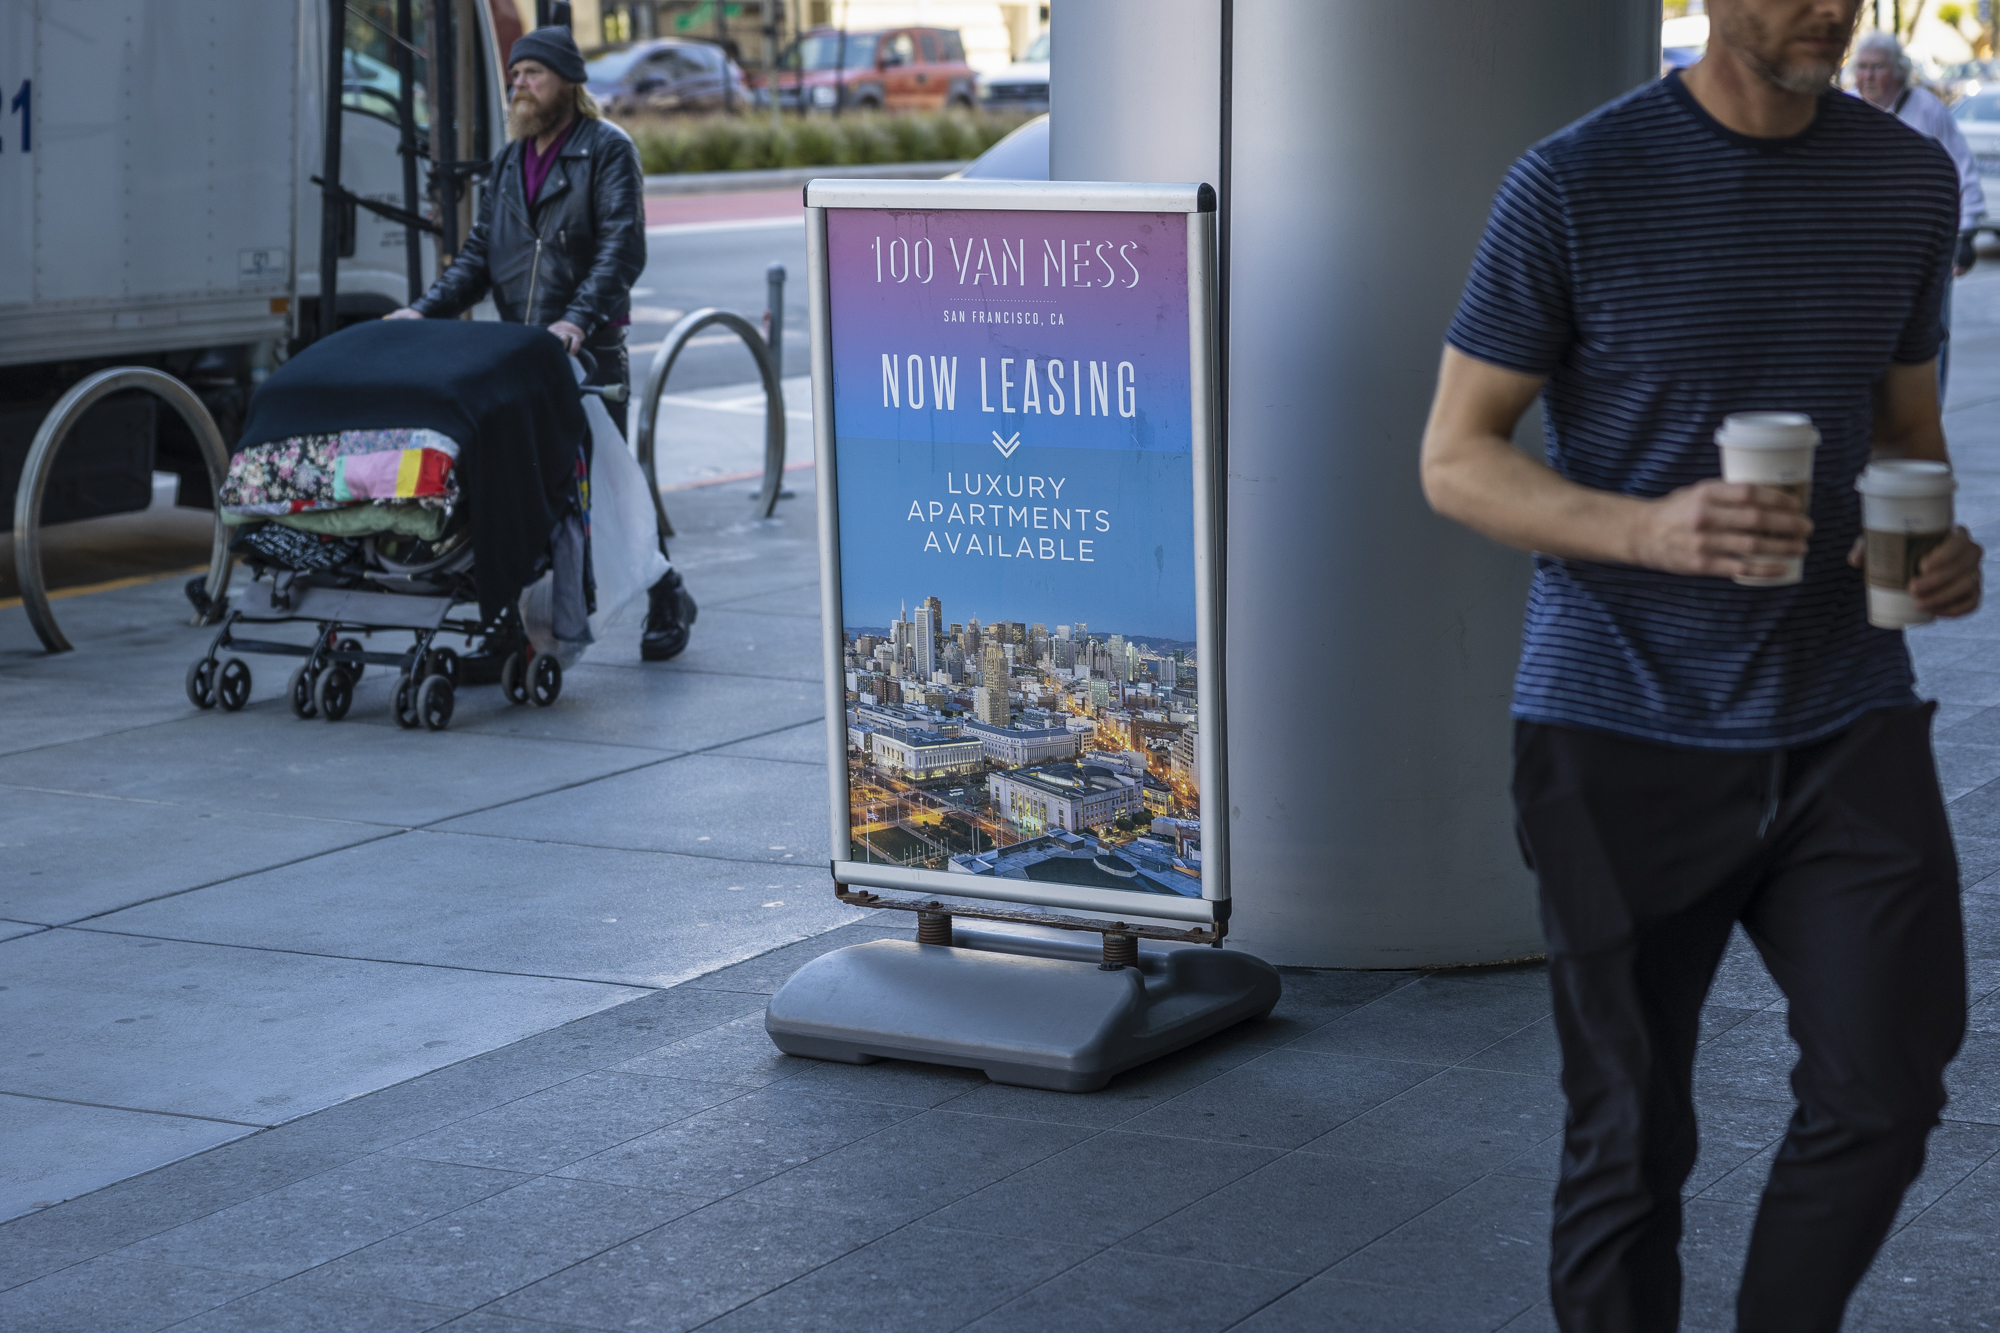 People pass a sign on a city sidewalk advertising luxury apartments.